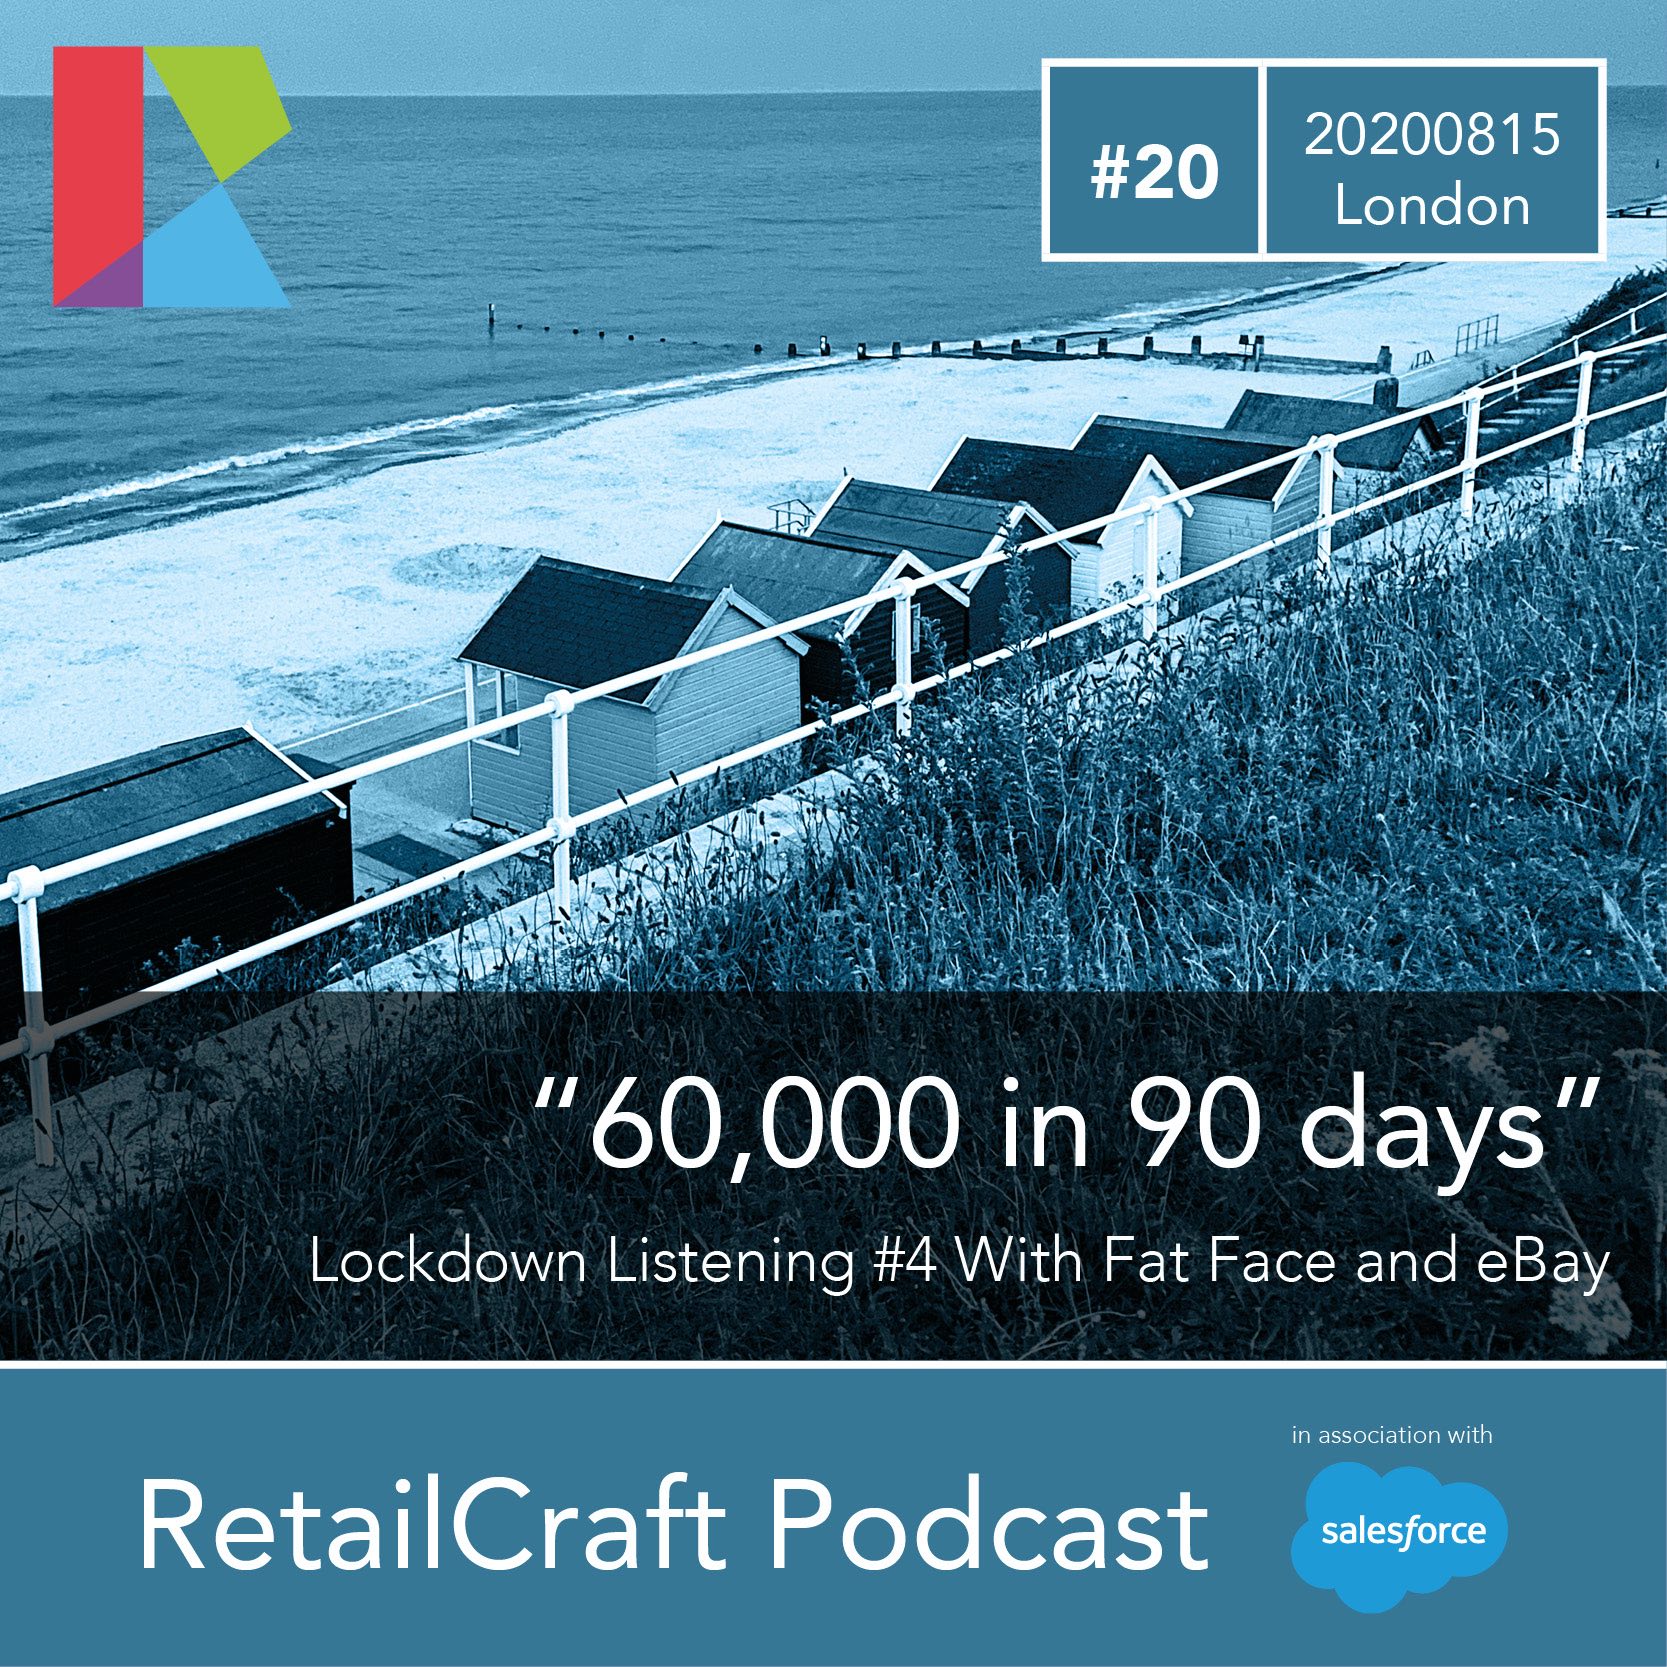 RetailCraft 20 – “60,000 in 90 days” – Mark Wright of Fat Face and Murray Lambell of eBay UK